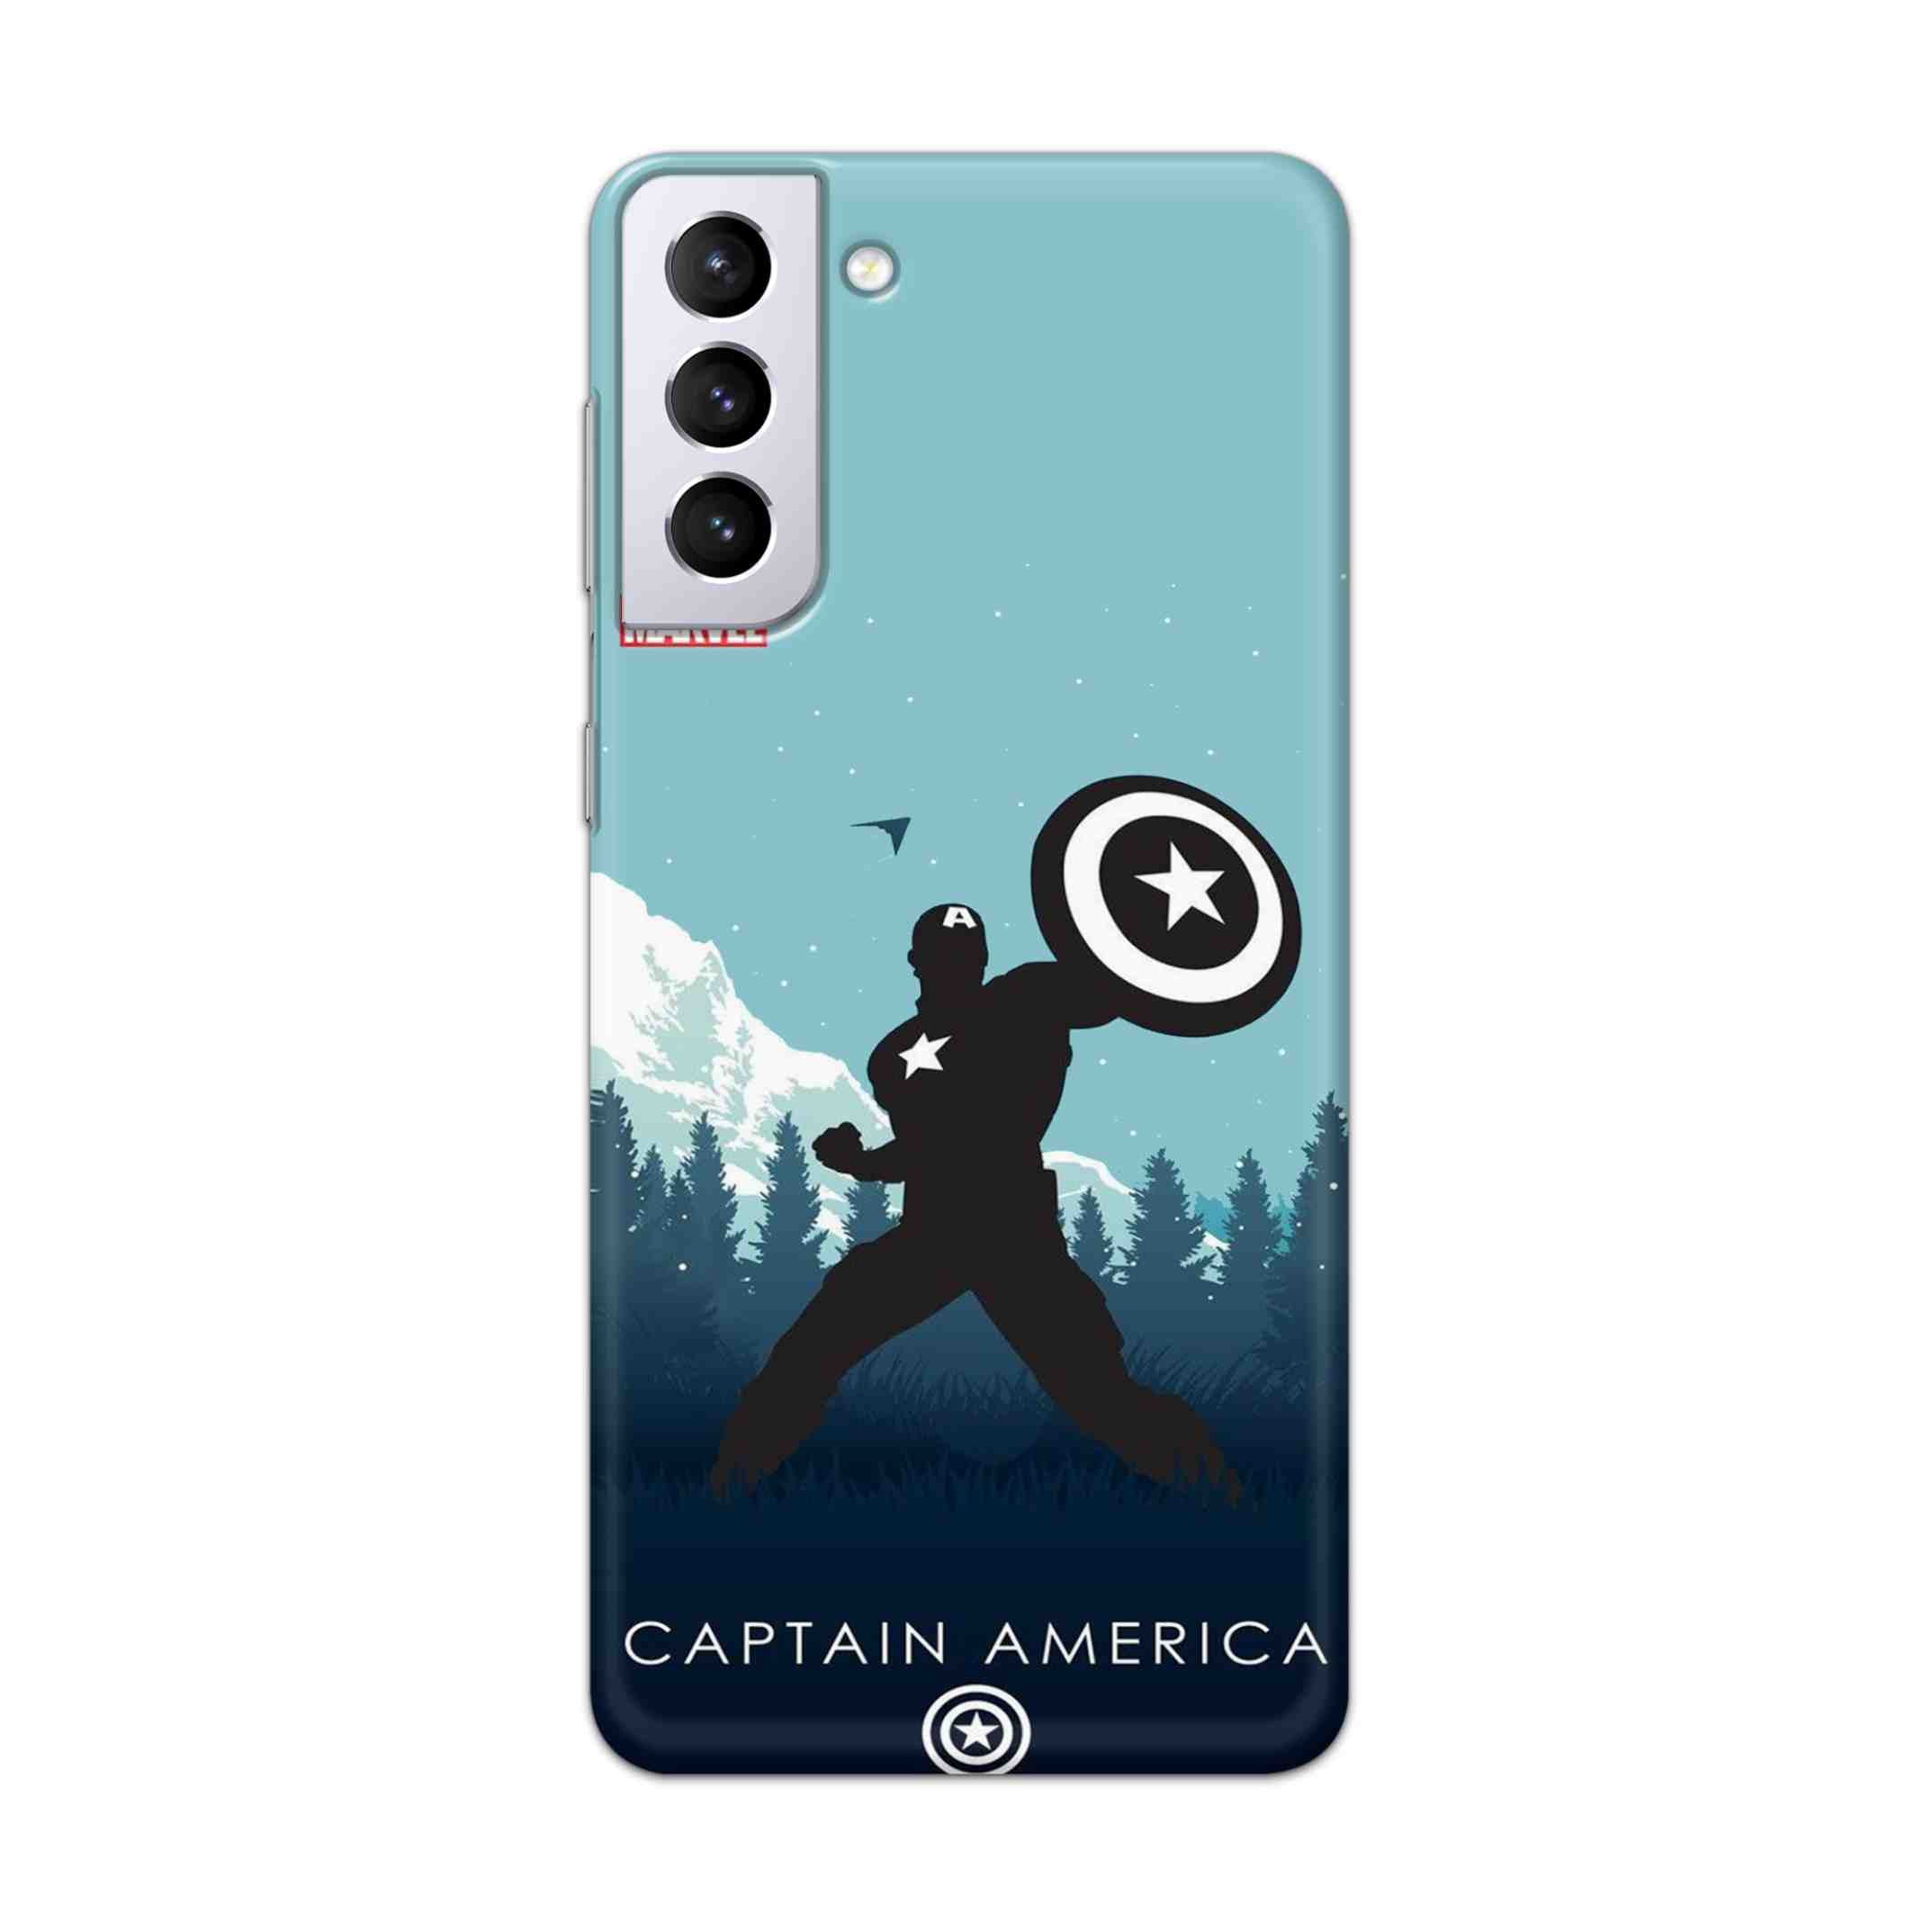 Buy Captain America Hard Back Mobile Phone Case Cover For Samsung Galaxy S21 Online